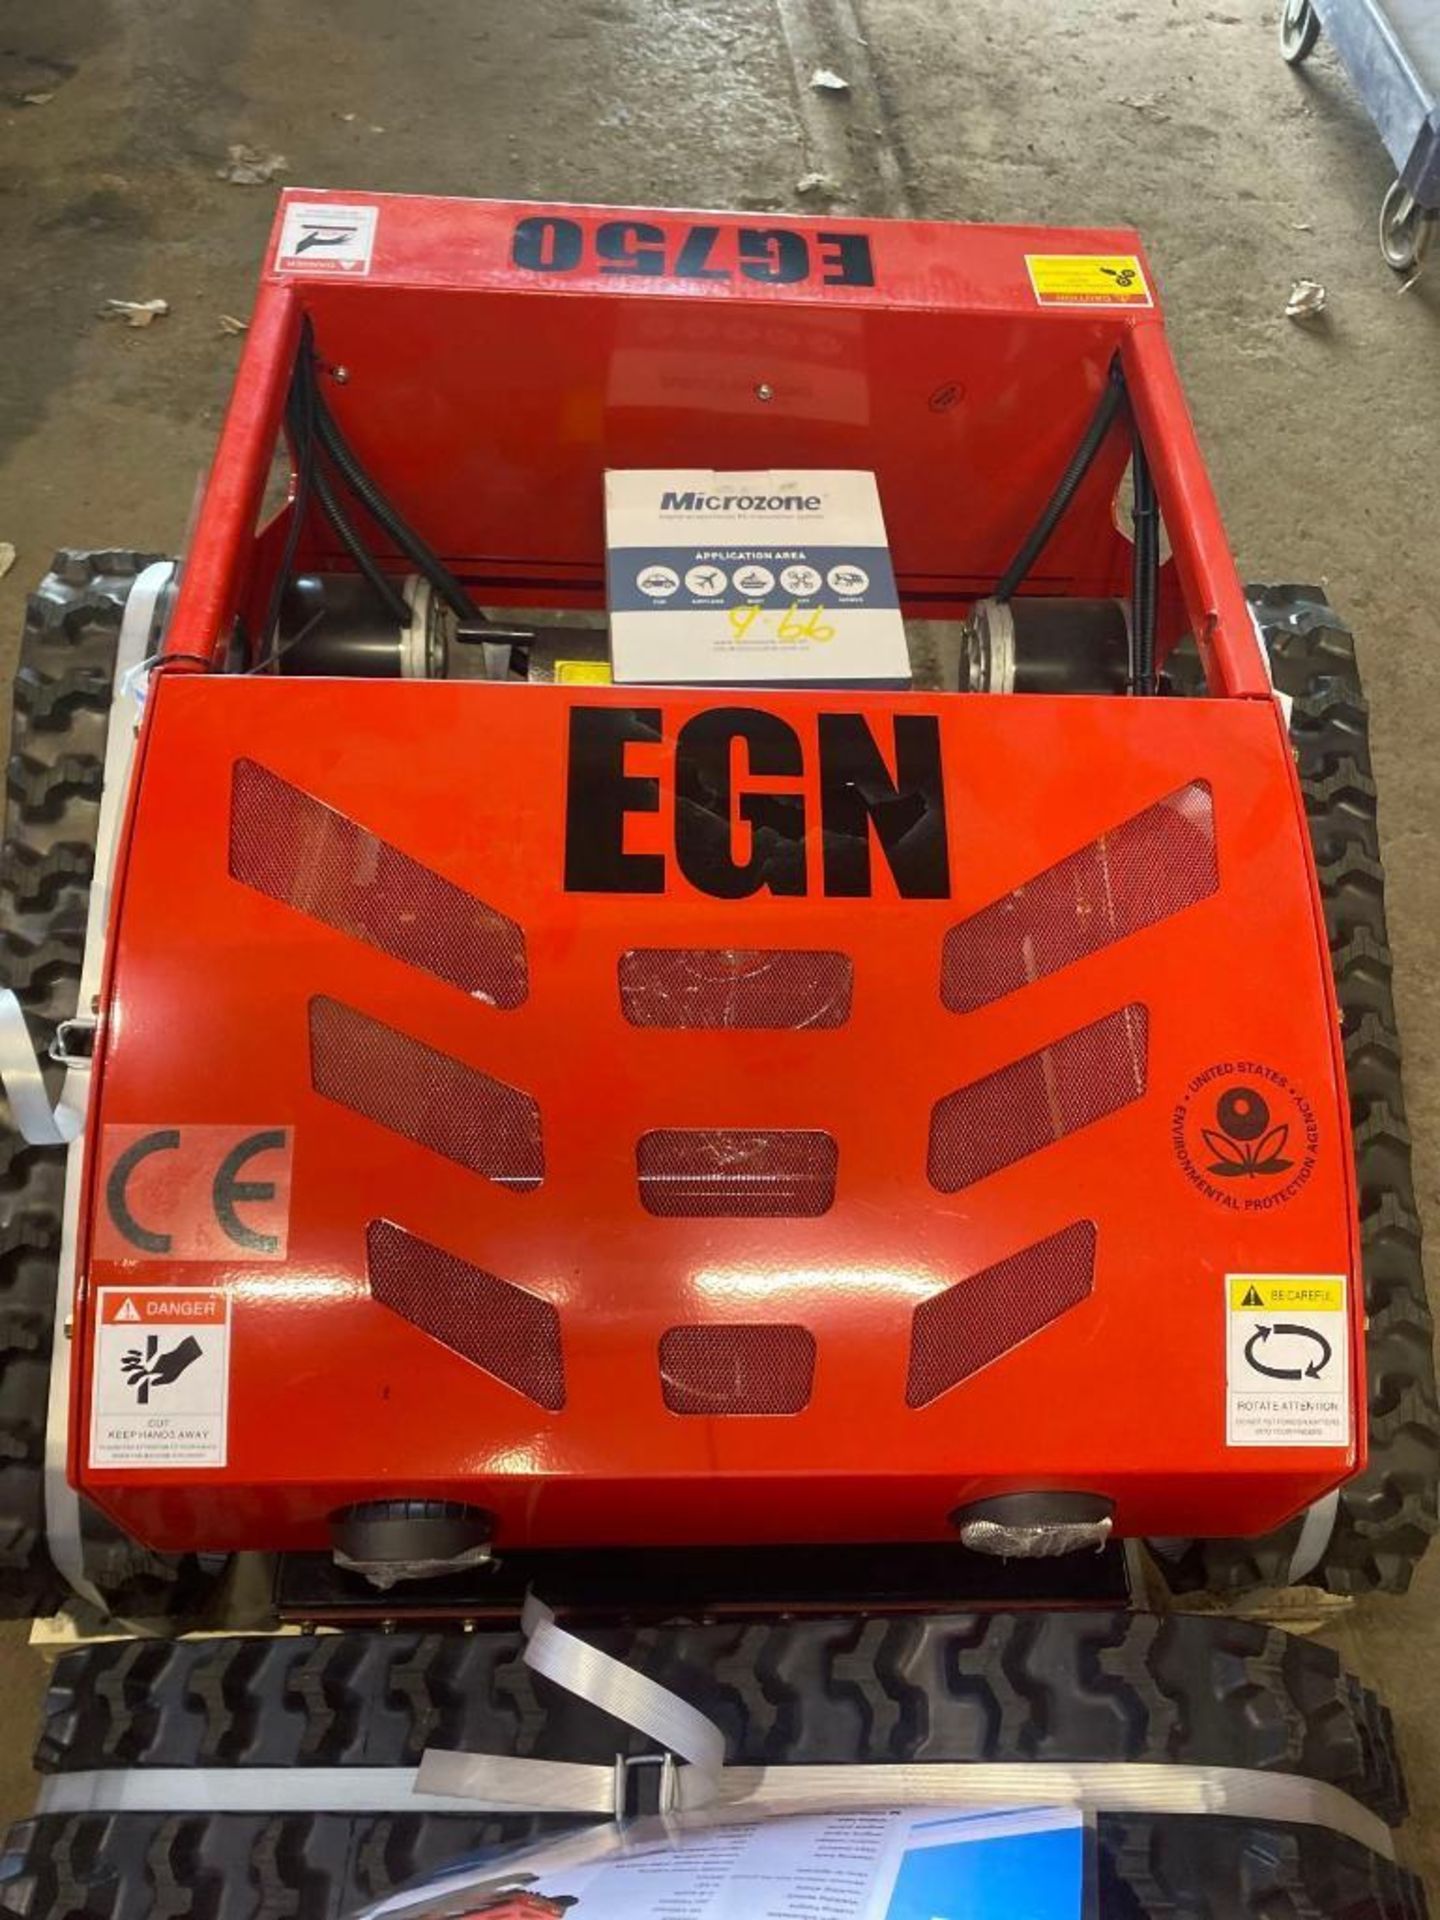 New EGN Co Remote Control Crawler Lawn Mower Model EG-750 - Image 3 of 3